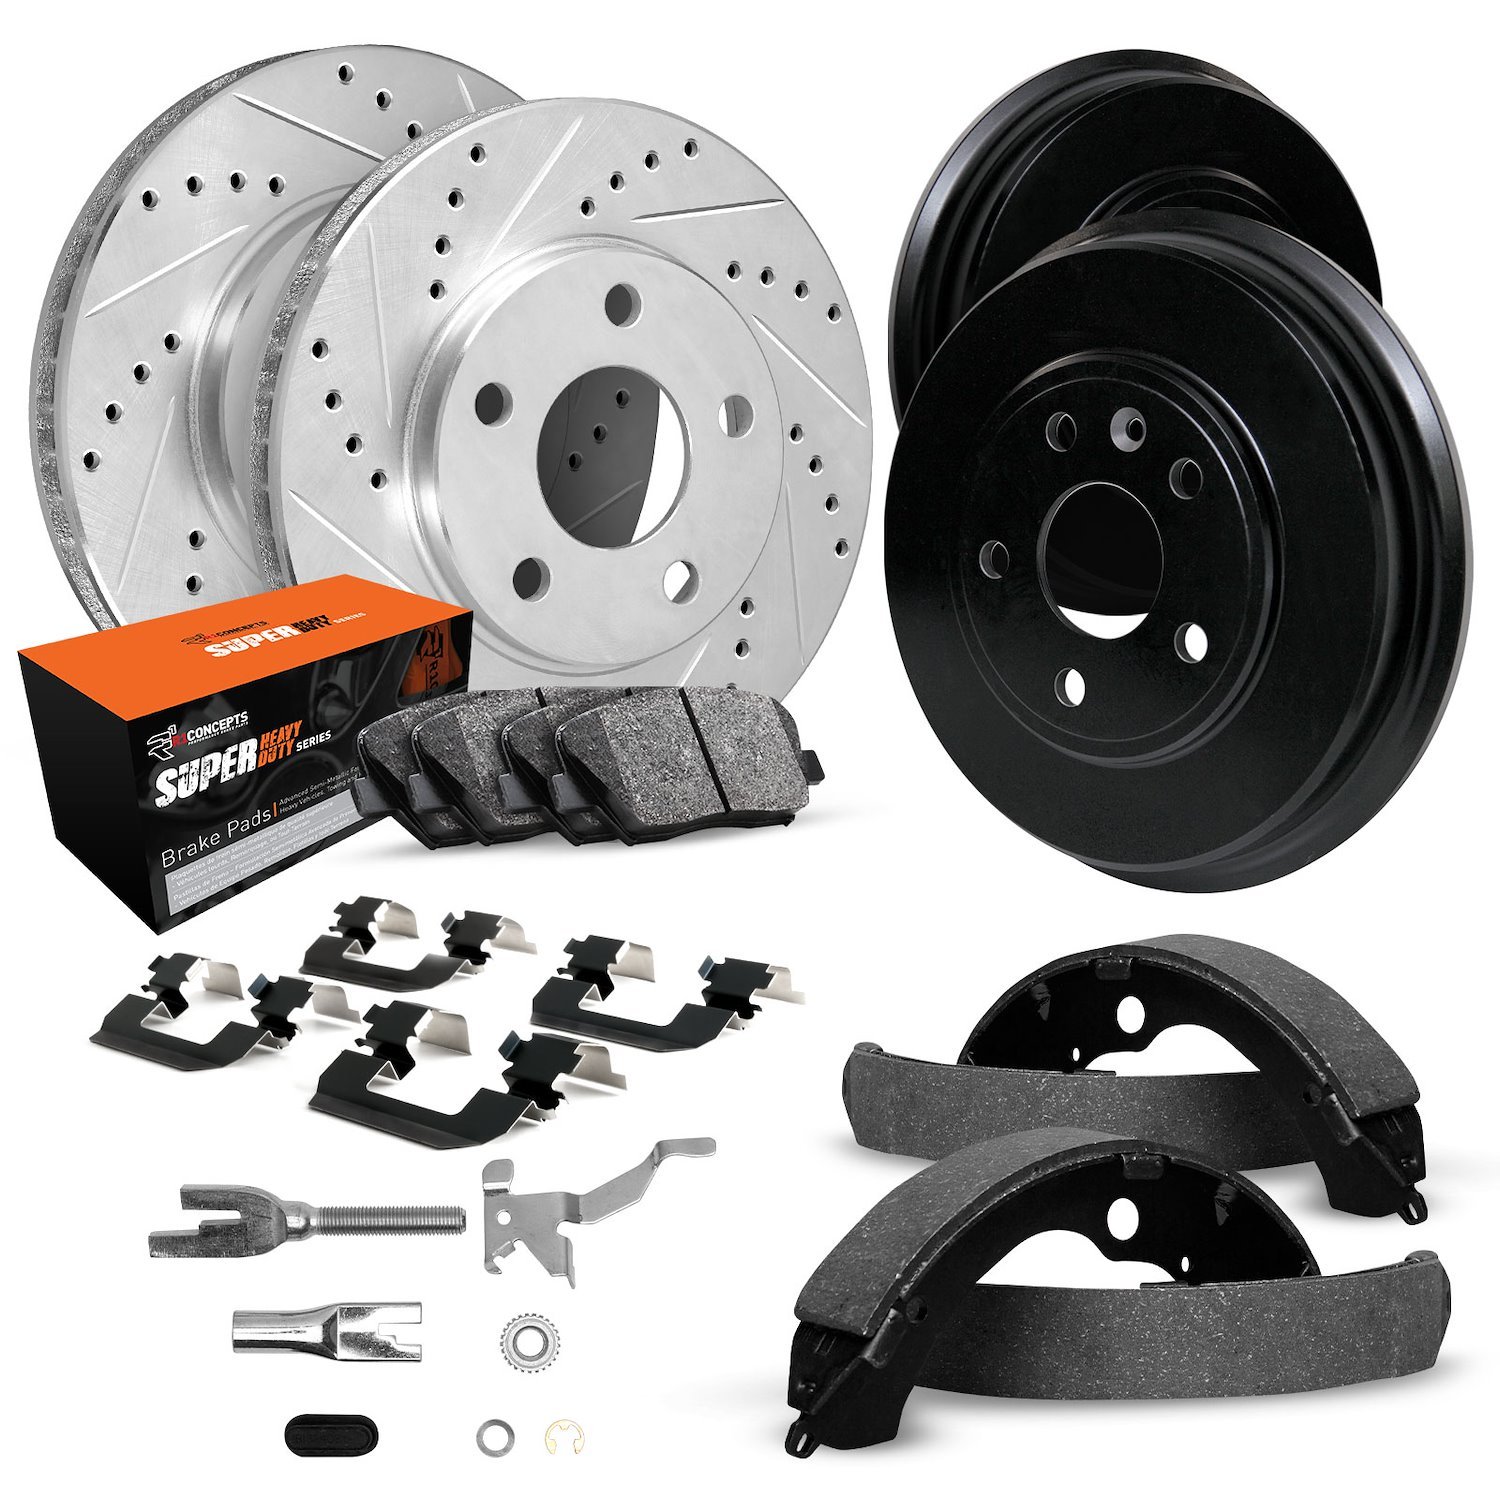 E-Line Drilled/Slotted Silver Rotor & Drum Set w/Super-Duty Pads, Shoes/Hardware/Adjusters, 1978-1997 Mopar